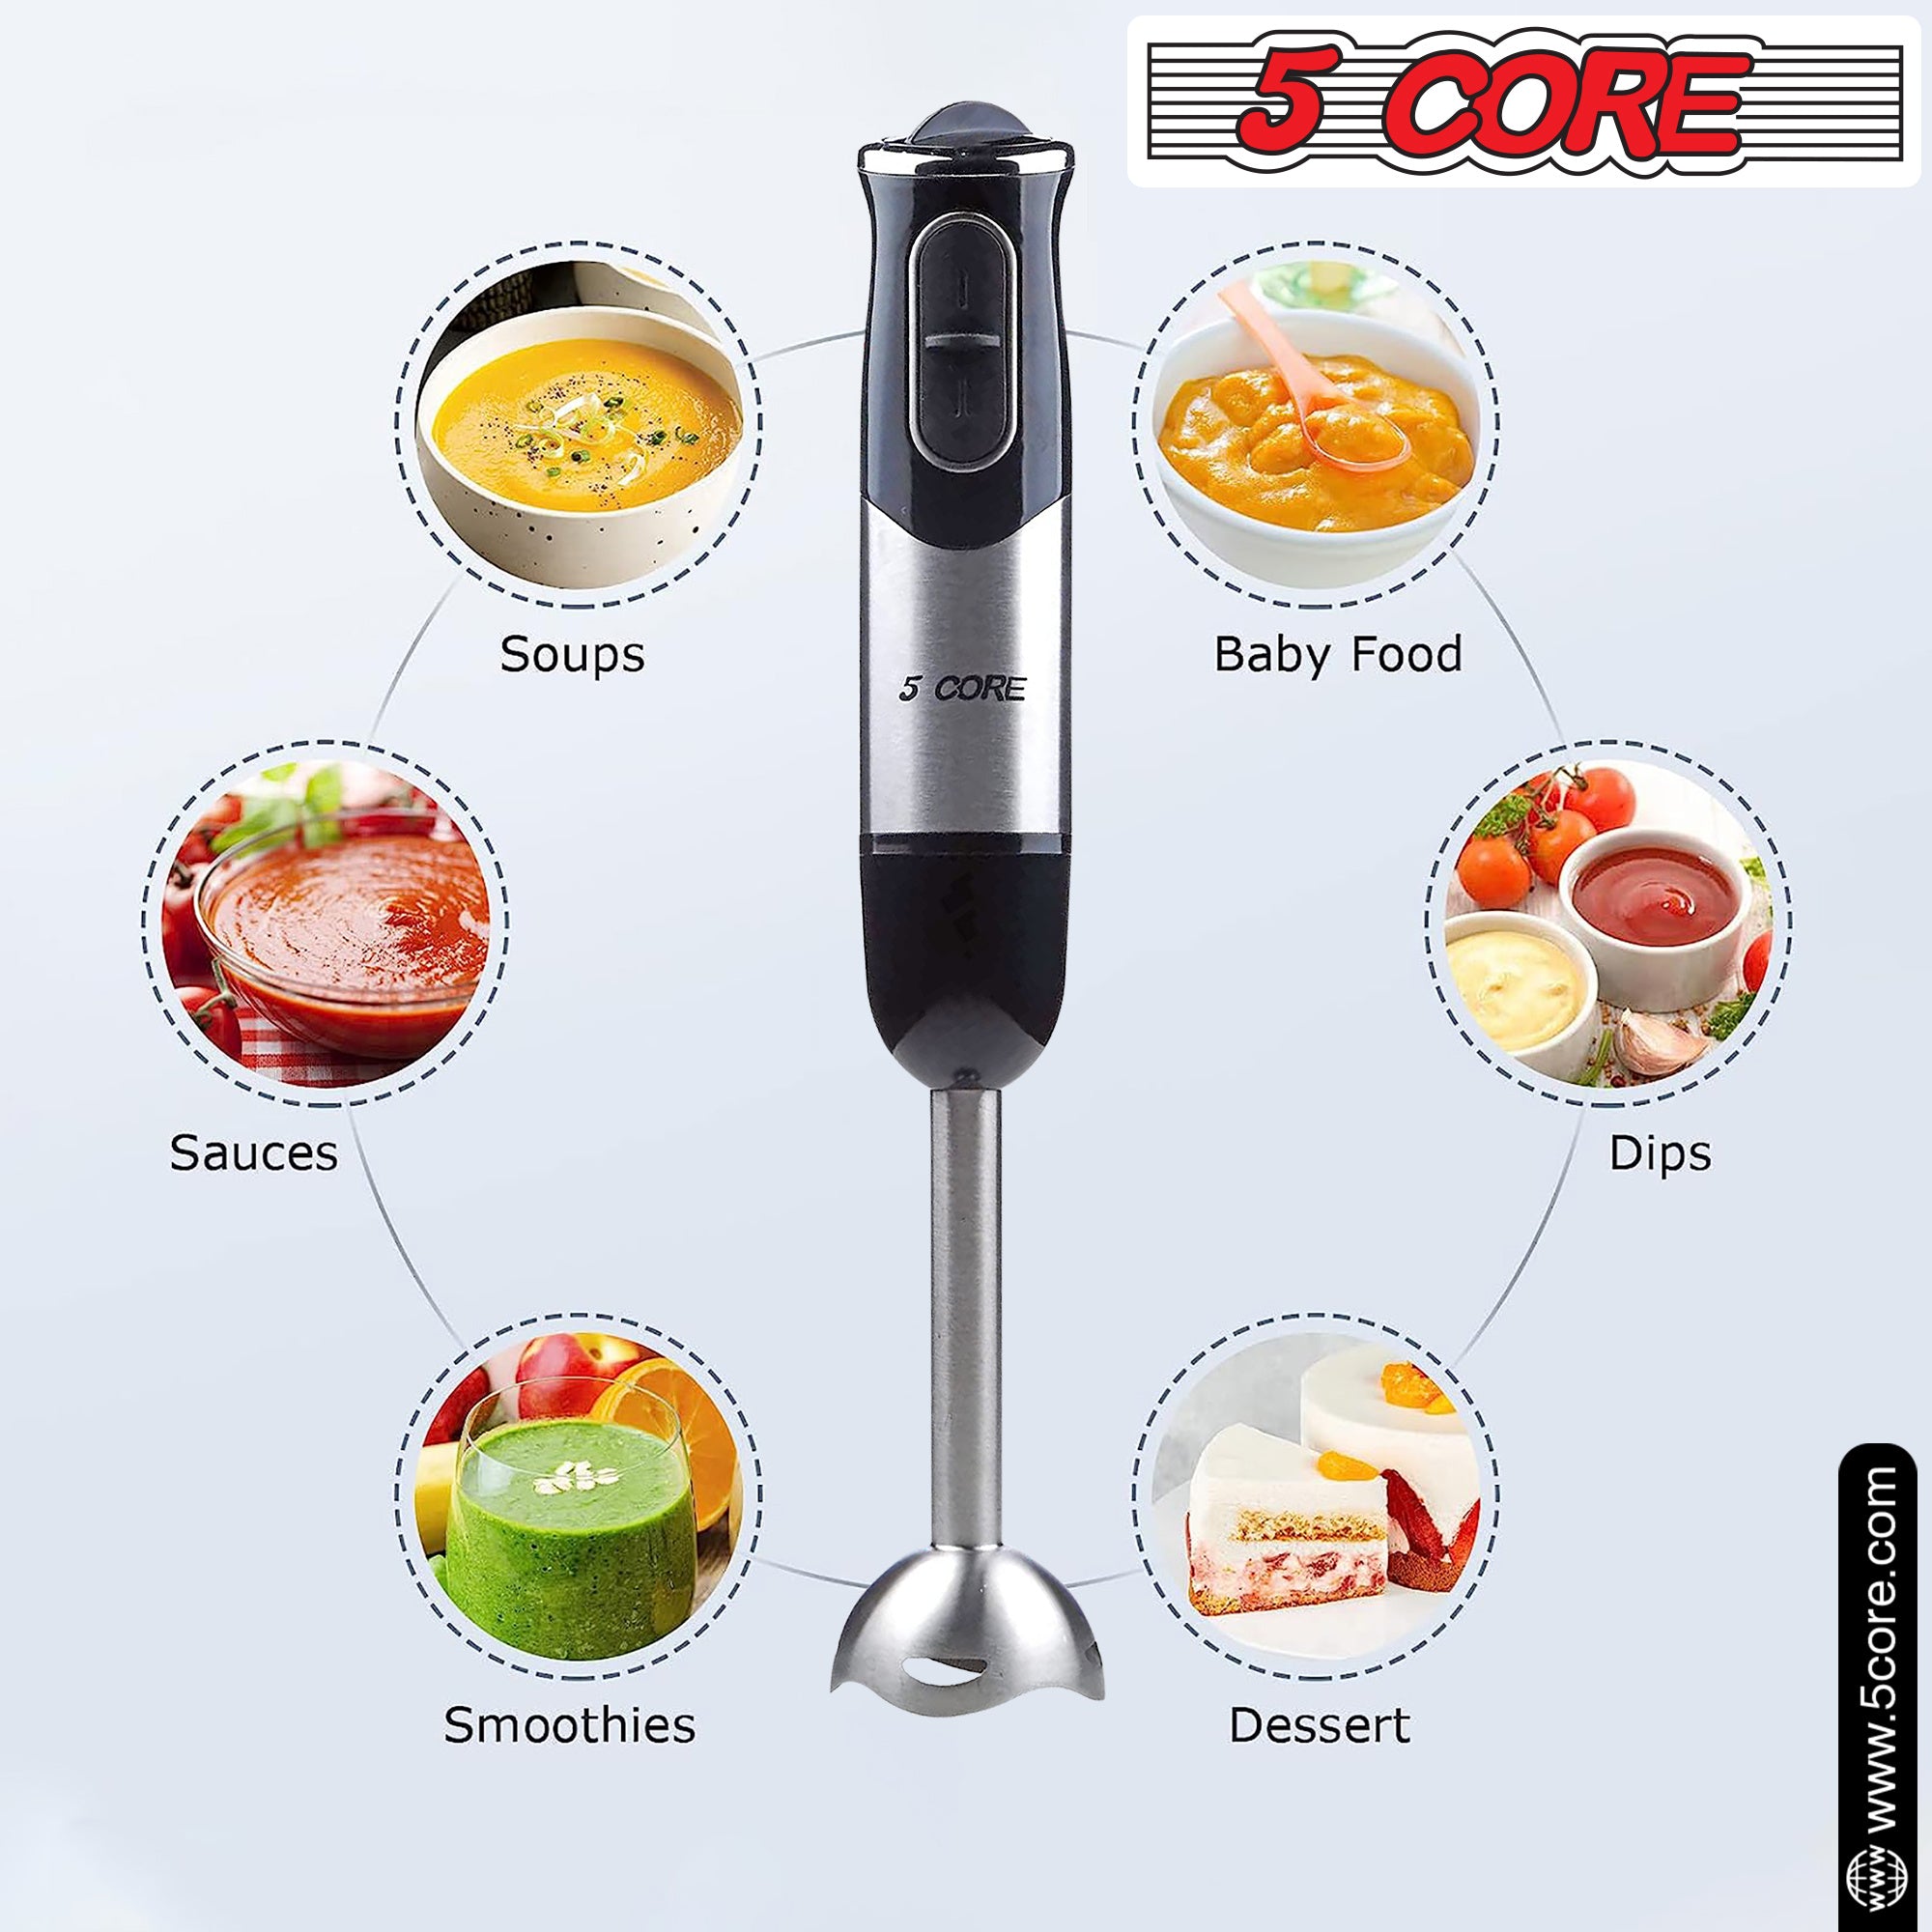 A Hand Held Blender Stick 500 WATT Immersion 2 Speed Turbo Mixer 2 Titanium Blades HB 1510 surrounded by fruits and juices.